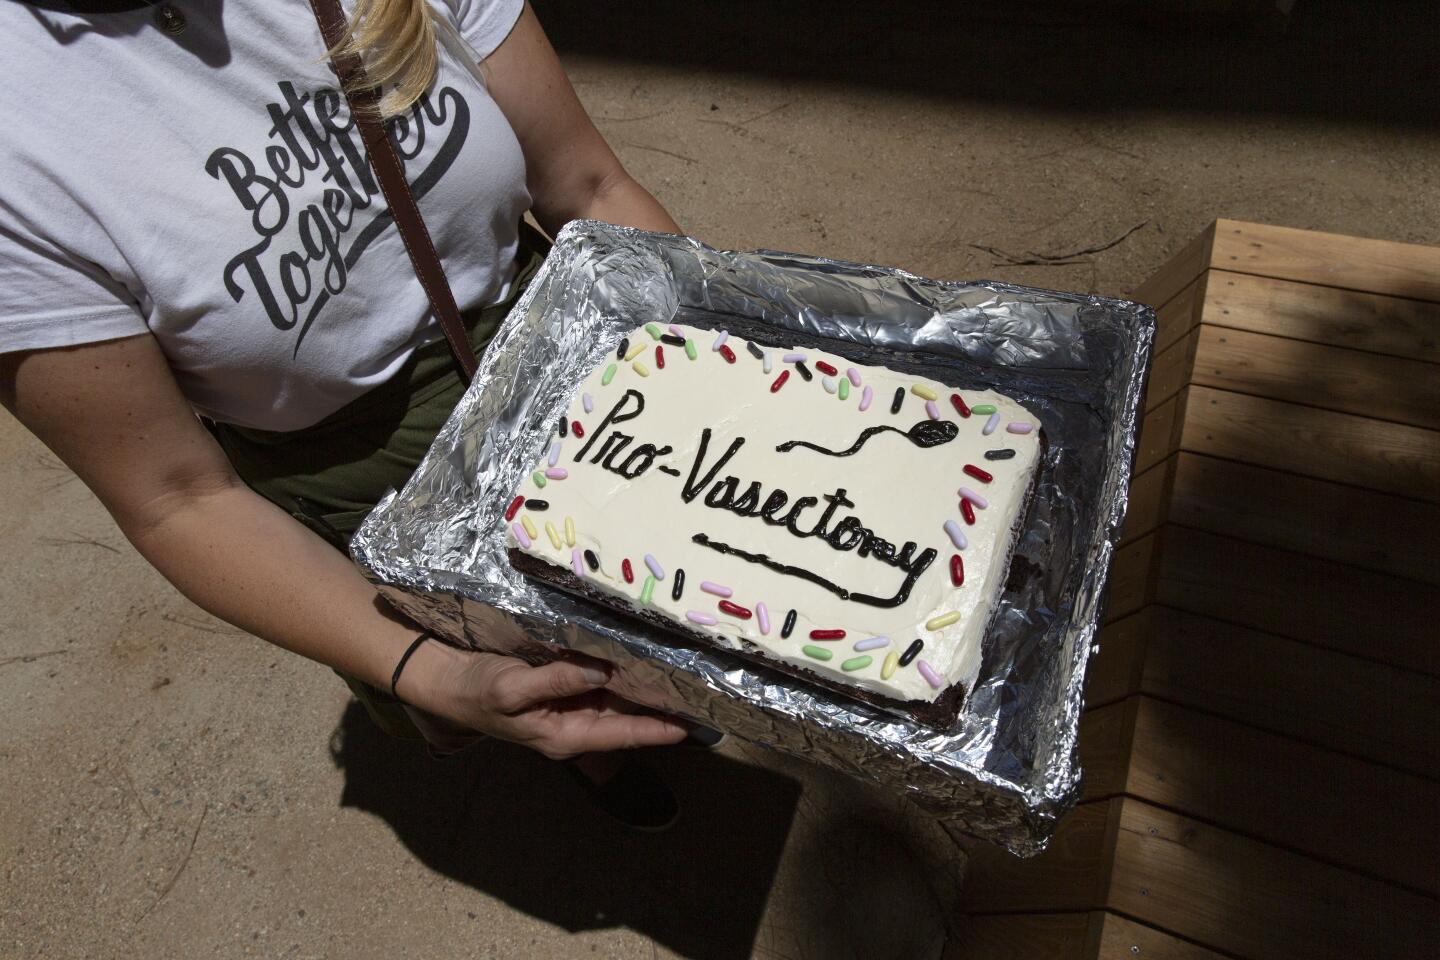 One of the cakes at Gather for Food's fundraiser was decorated to read "pro-vasectomy."